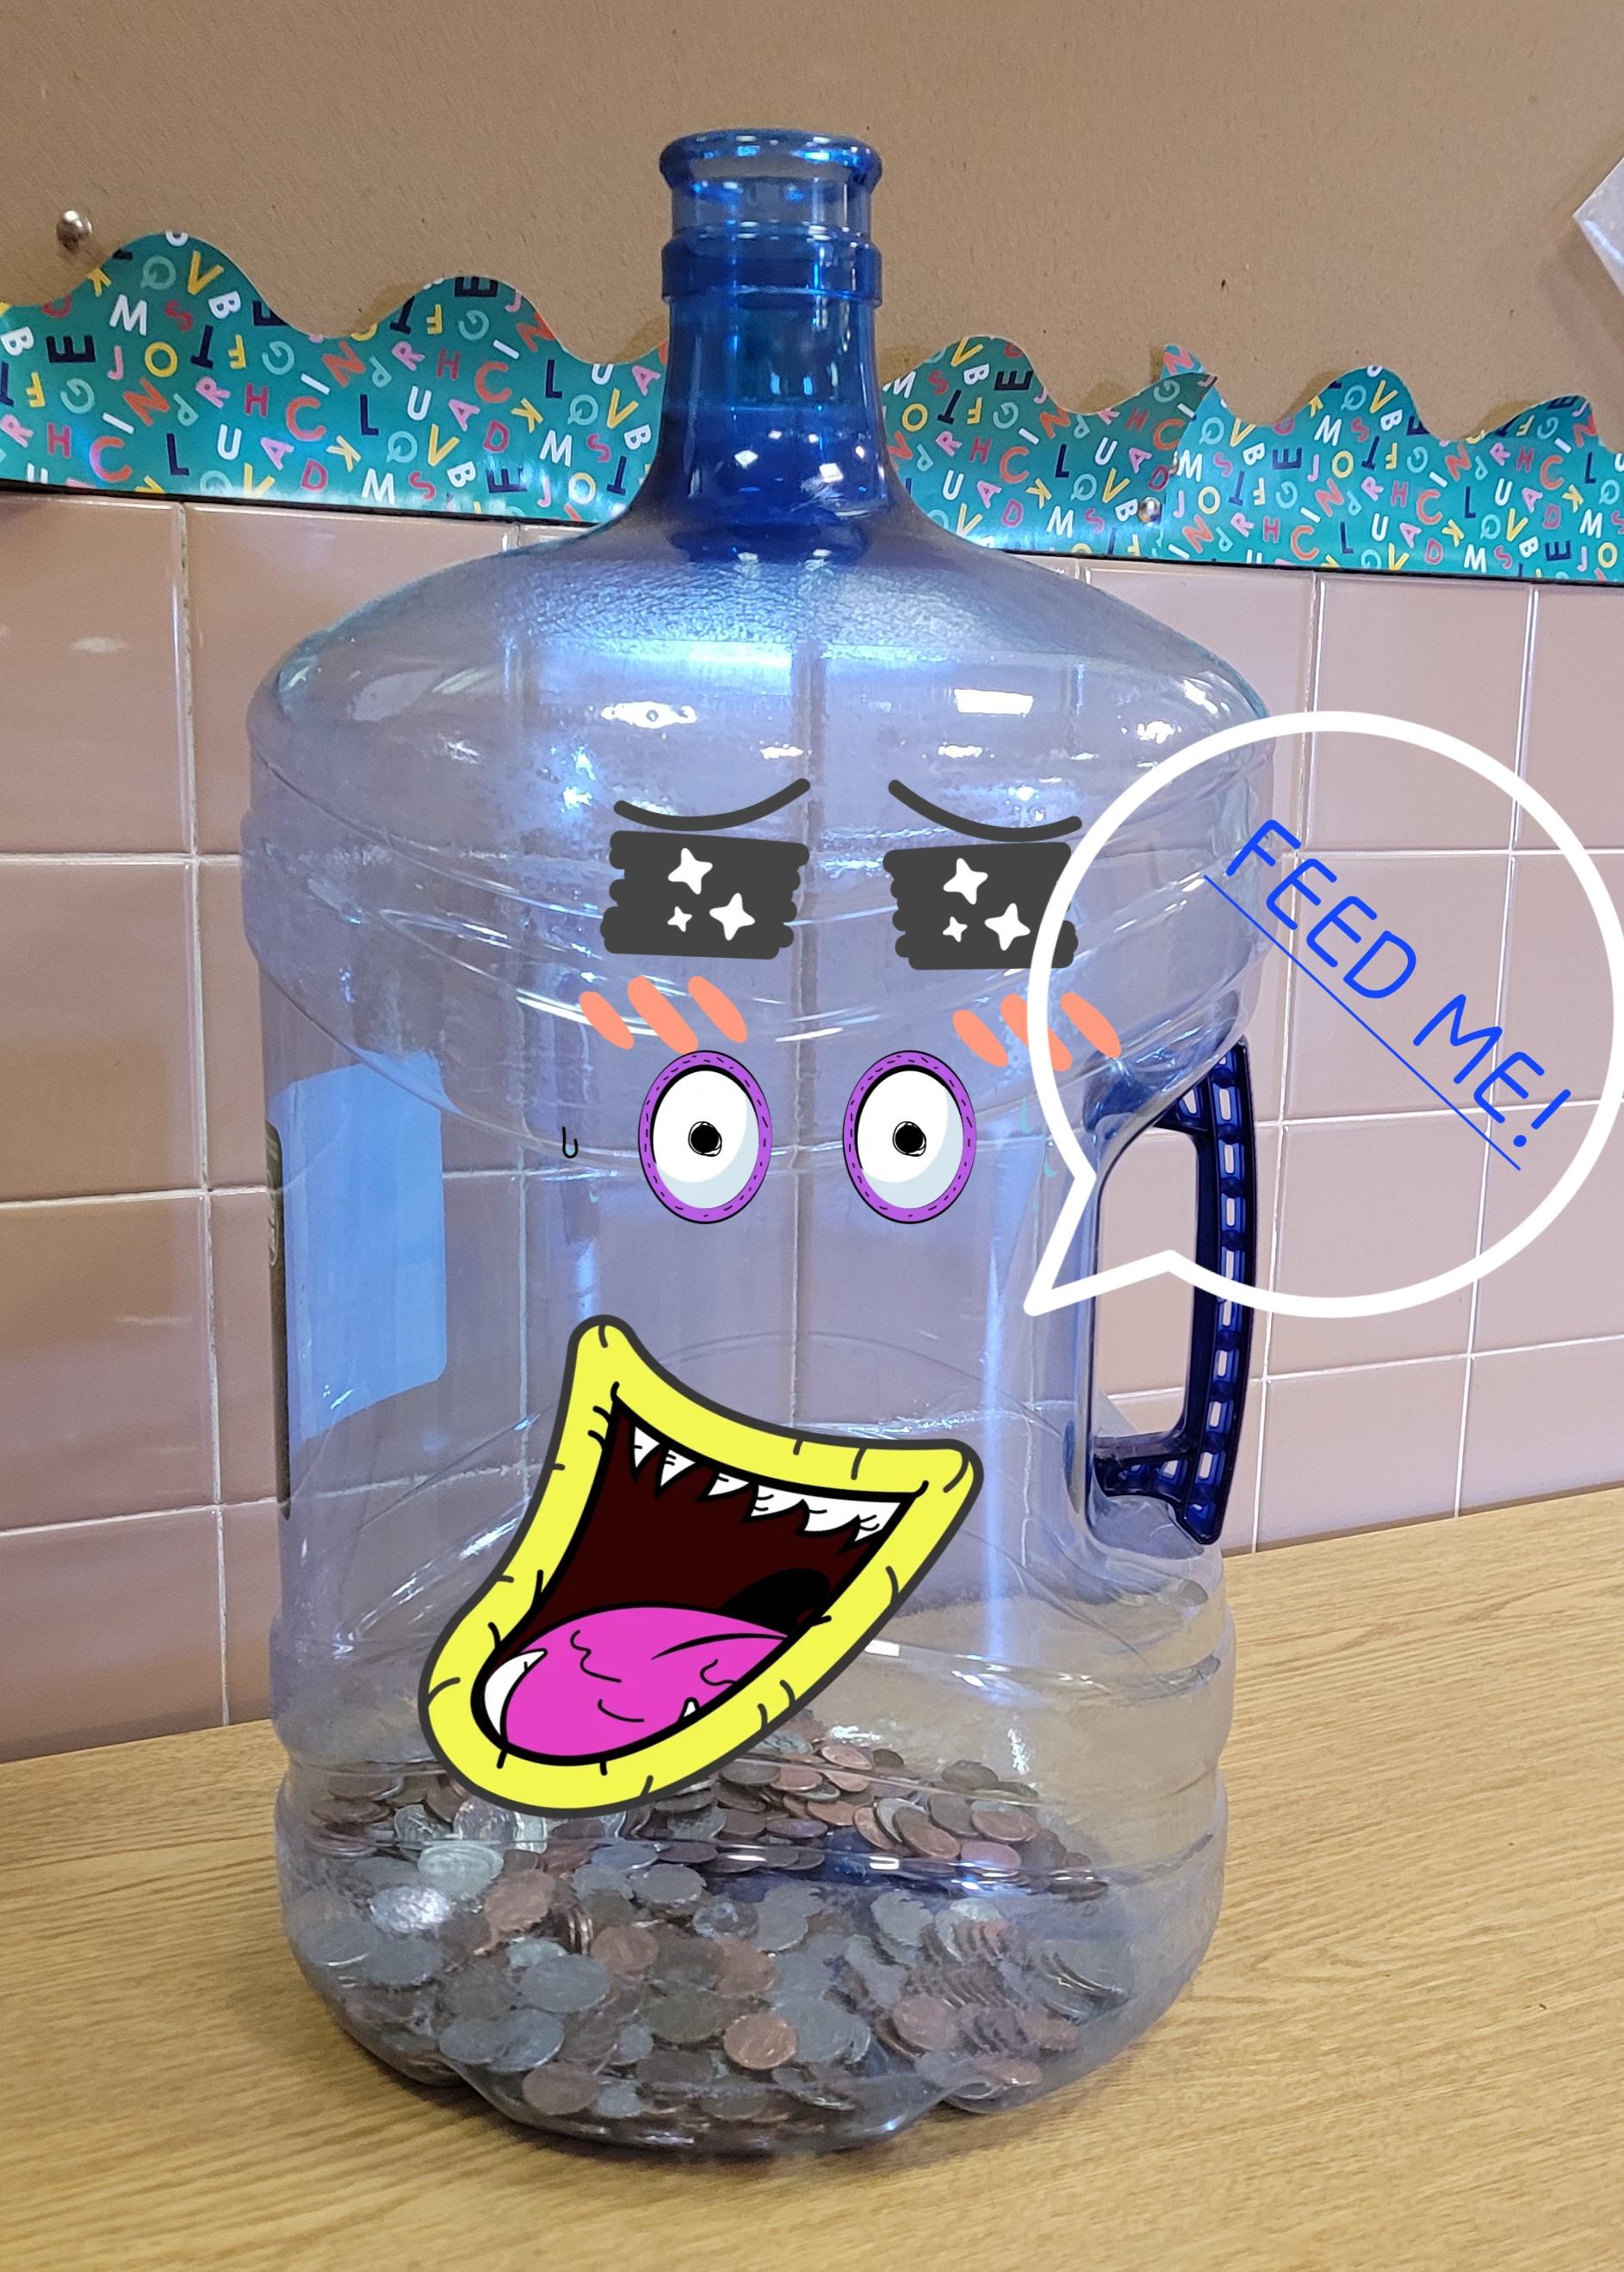 Please feed the water bottle with your pennies!